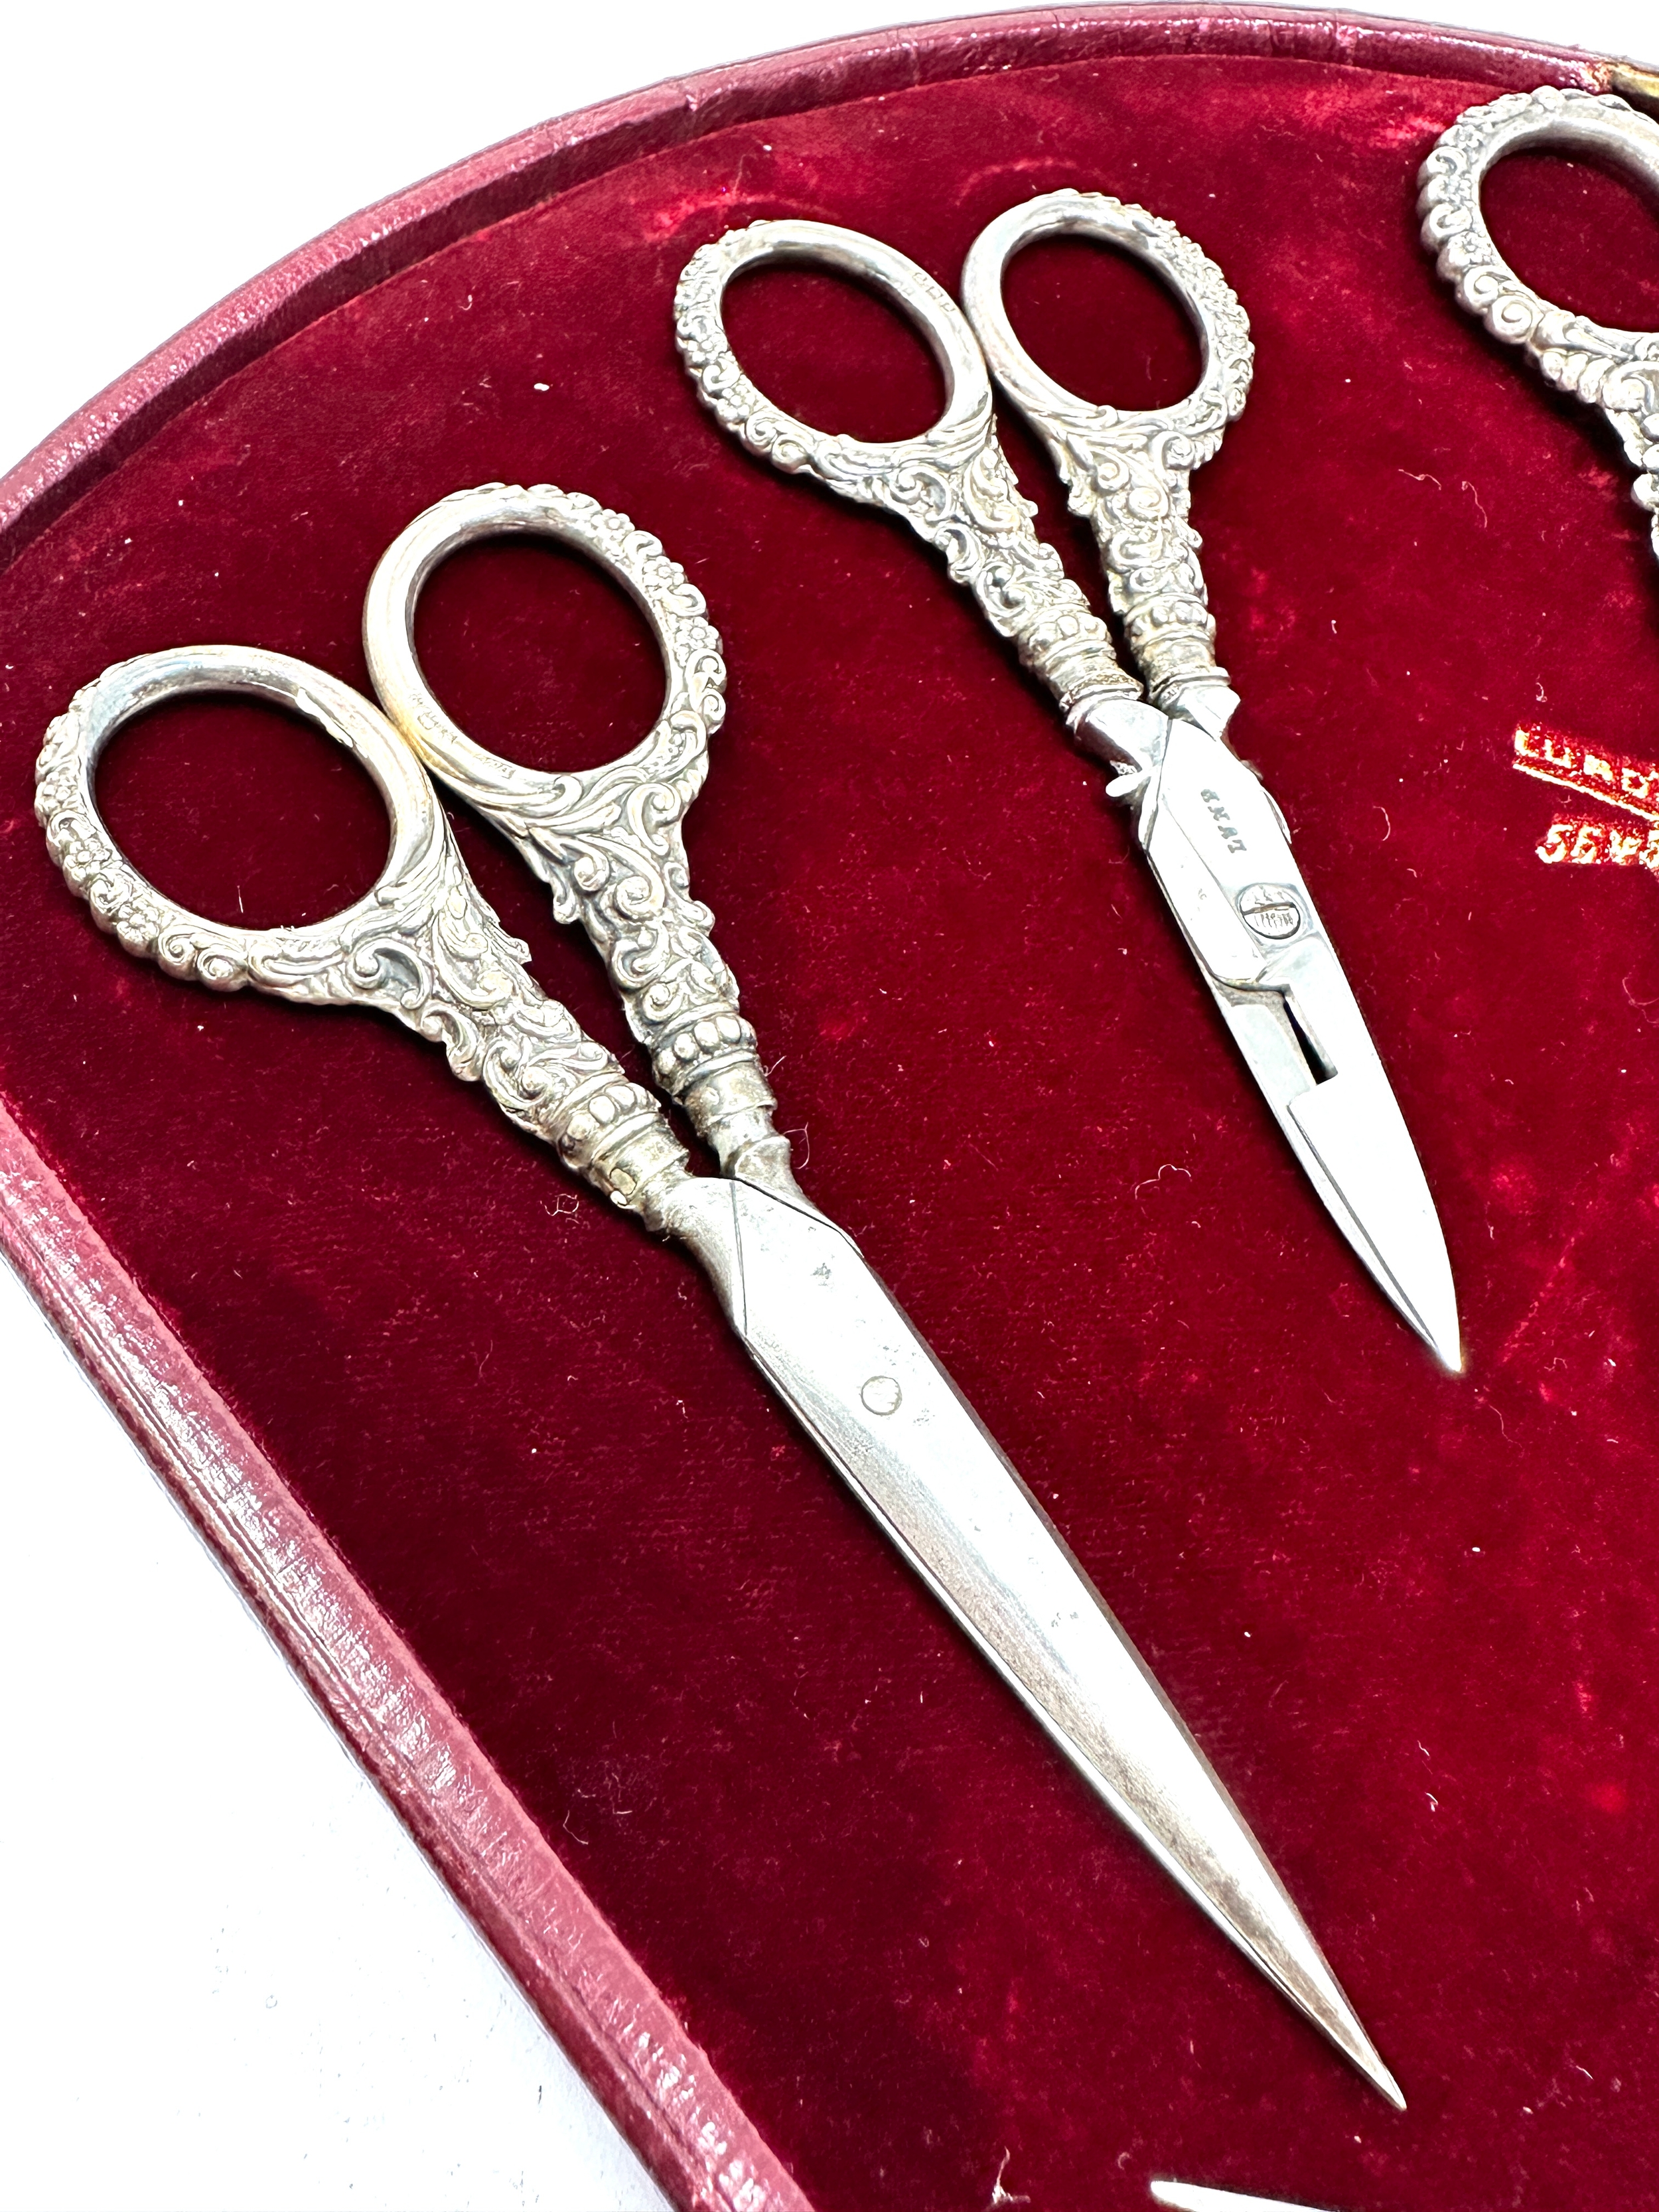 Fine large set of antique silver handle scissors original boxed by Lunds of London - Image 3 of 8